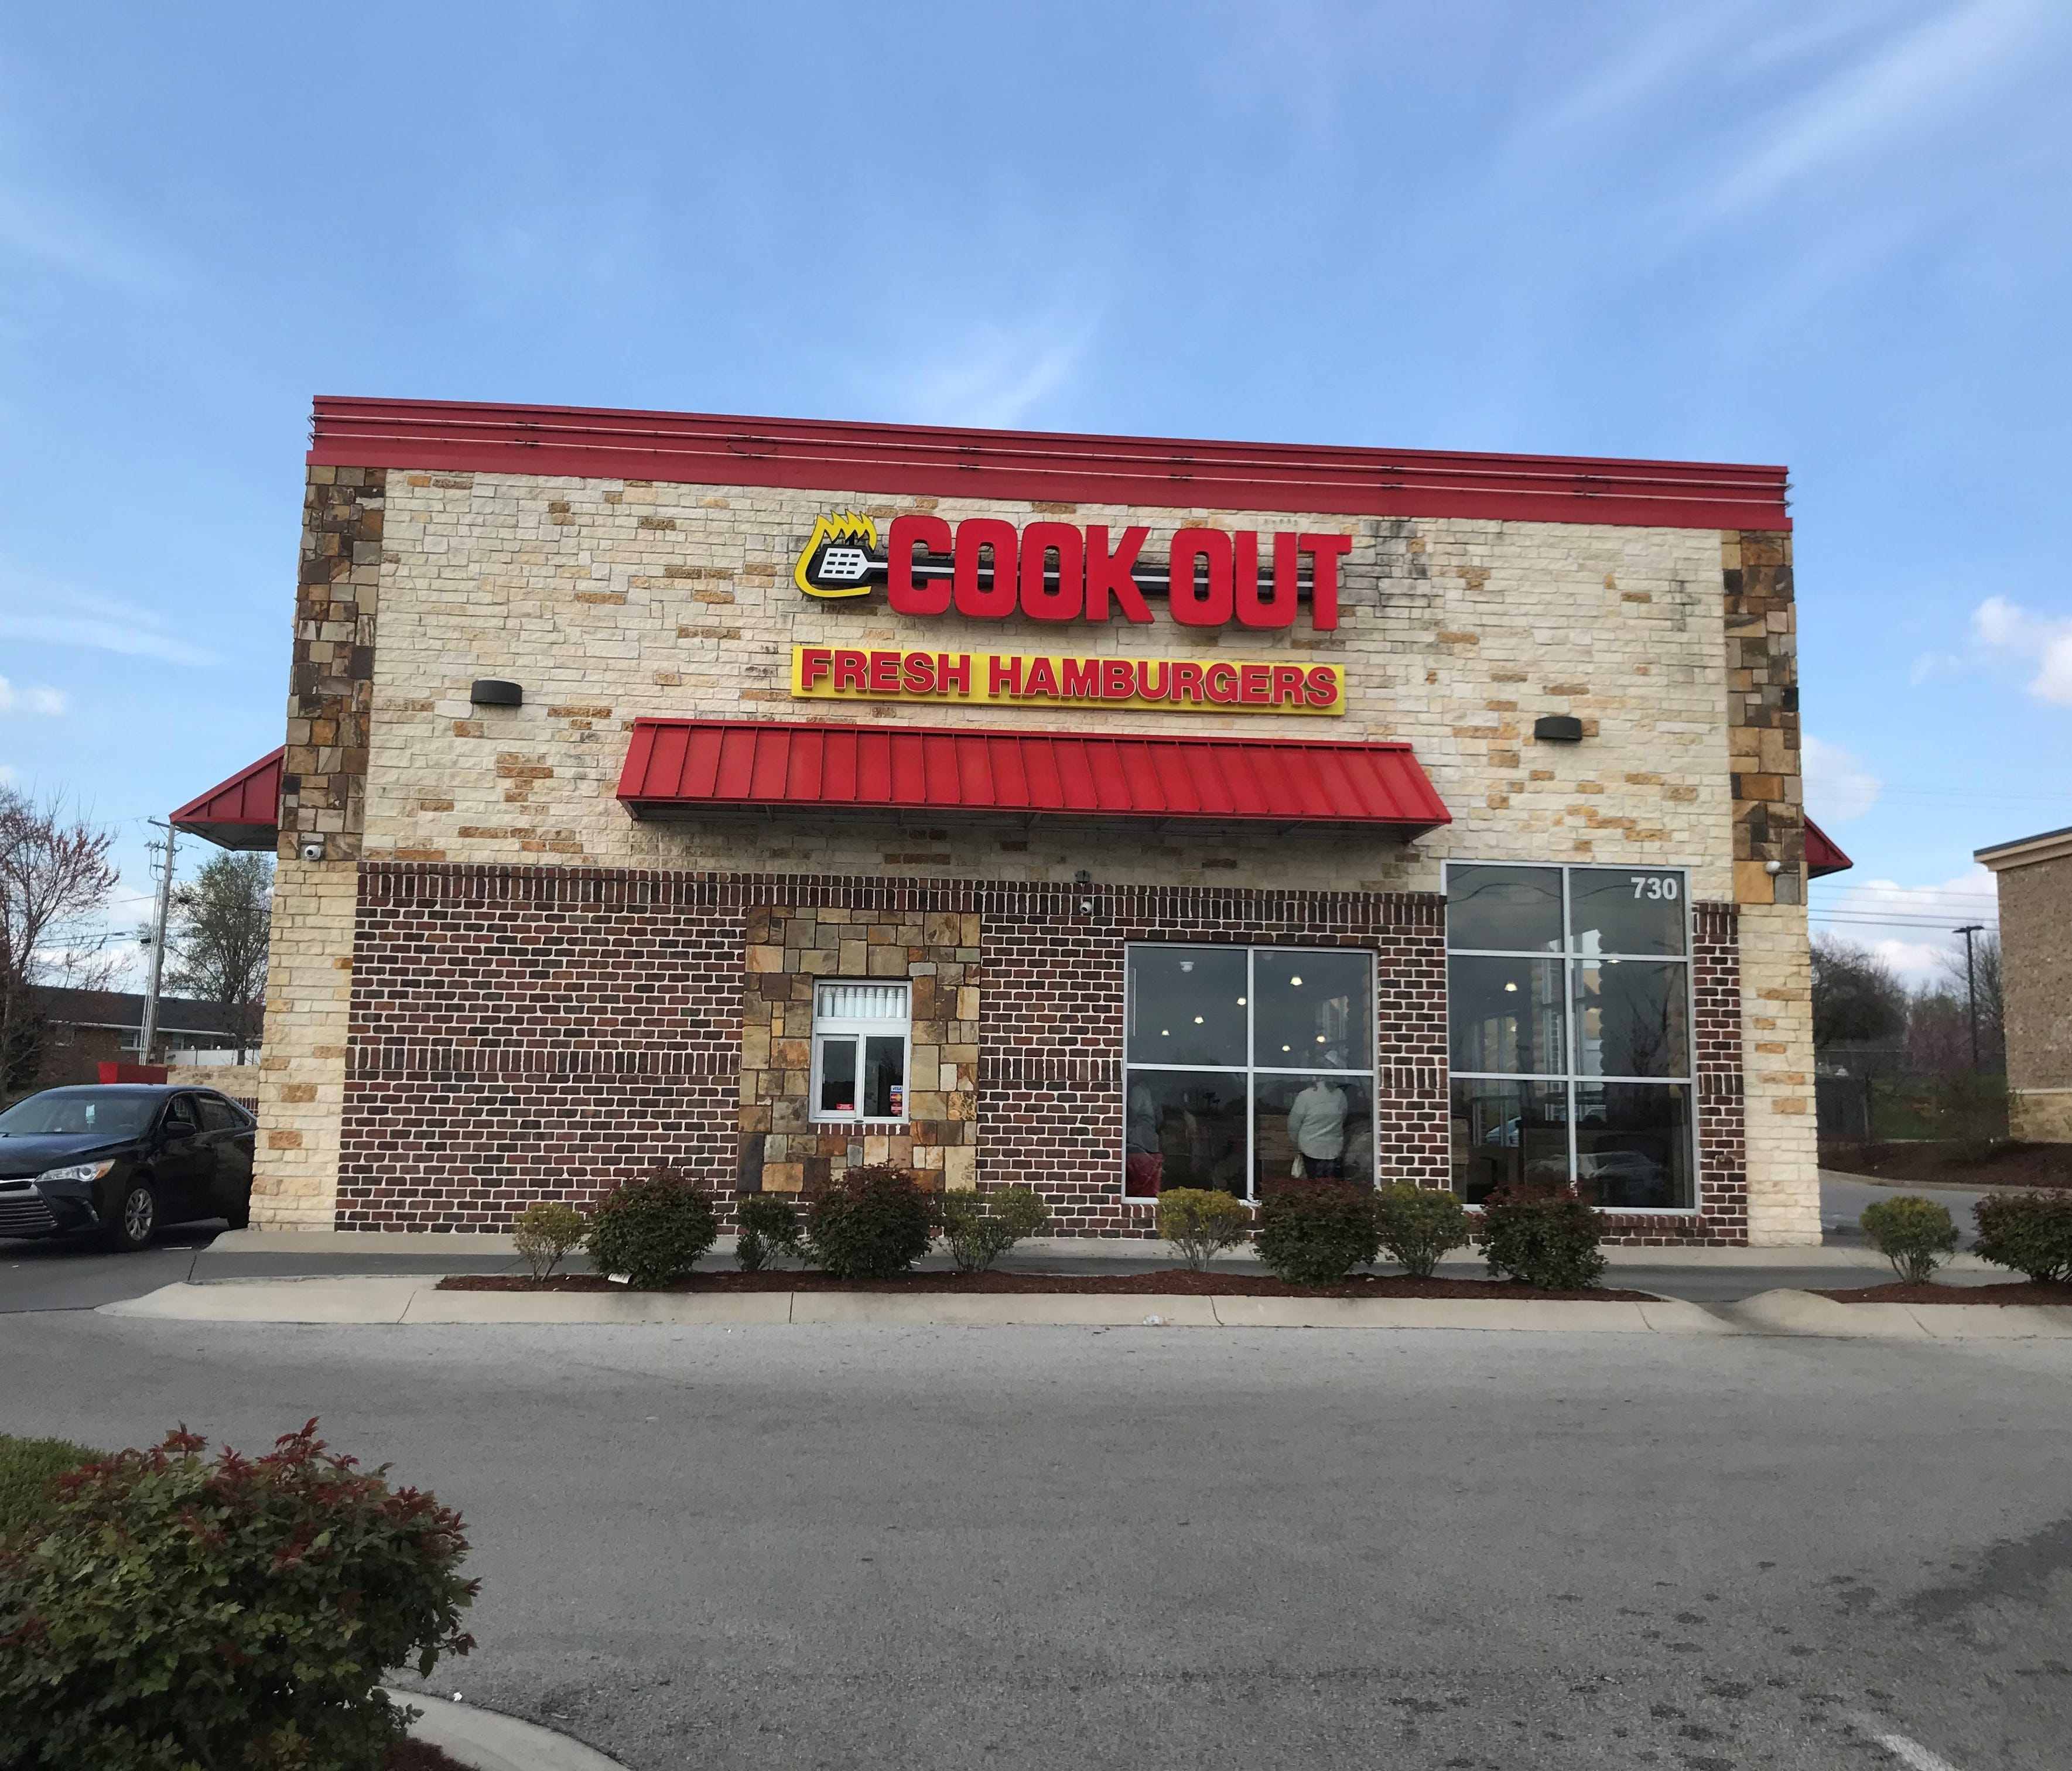 Cook Out has more than 200 locations across 10 Southeastern states. This one in is in Bowling Green, Kentucky.